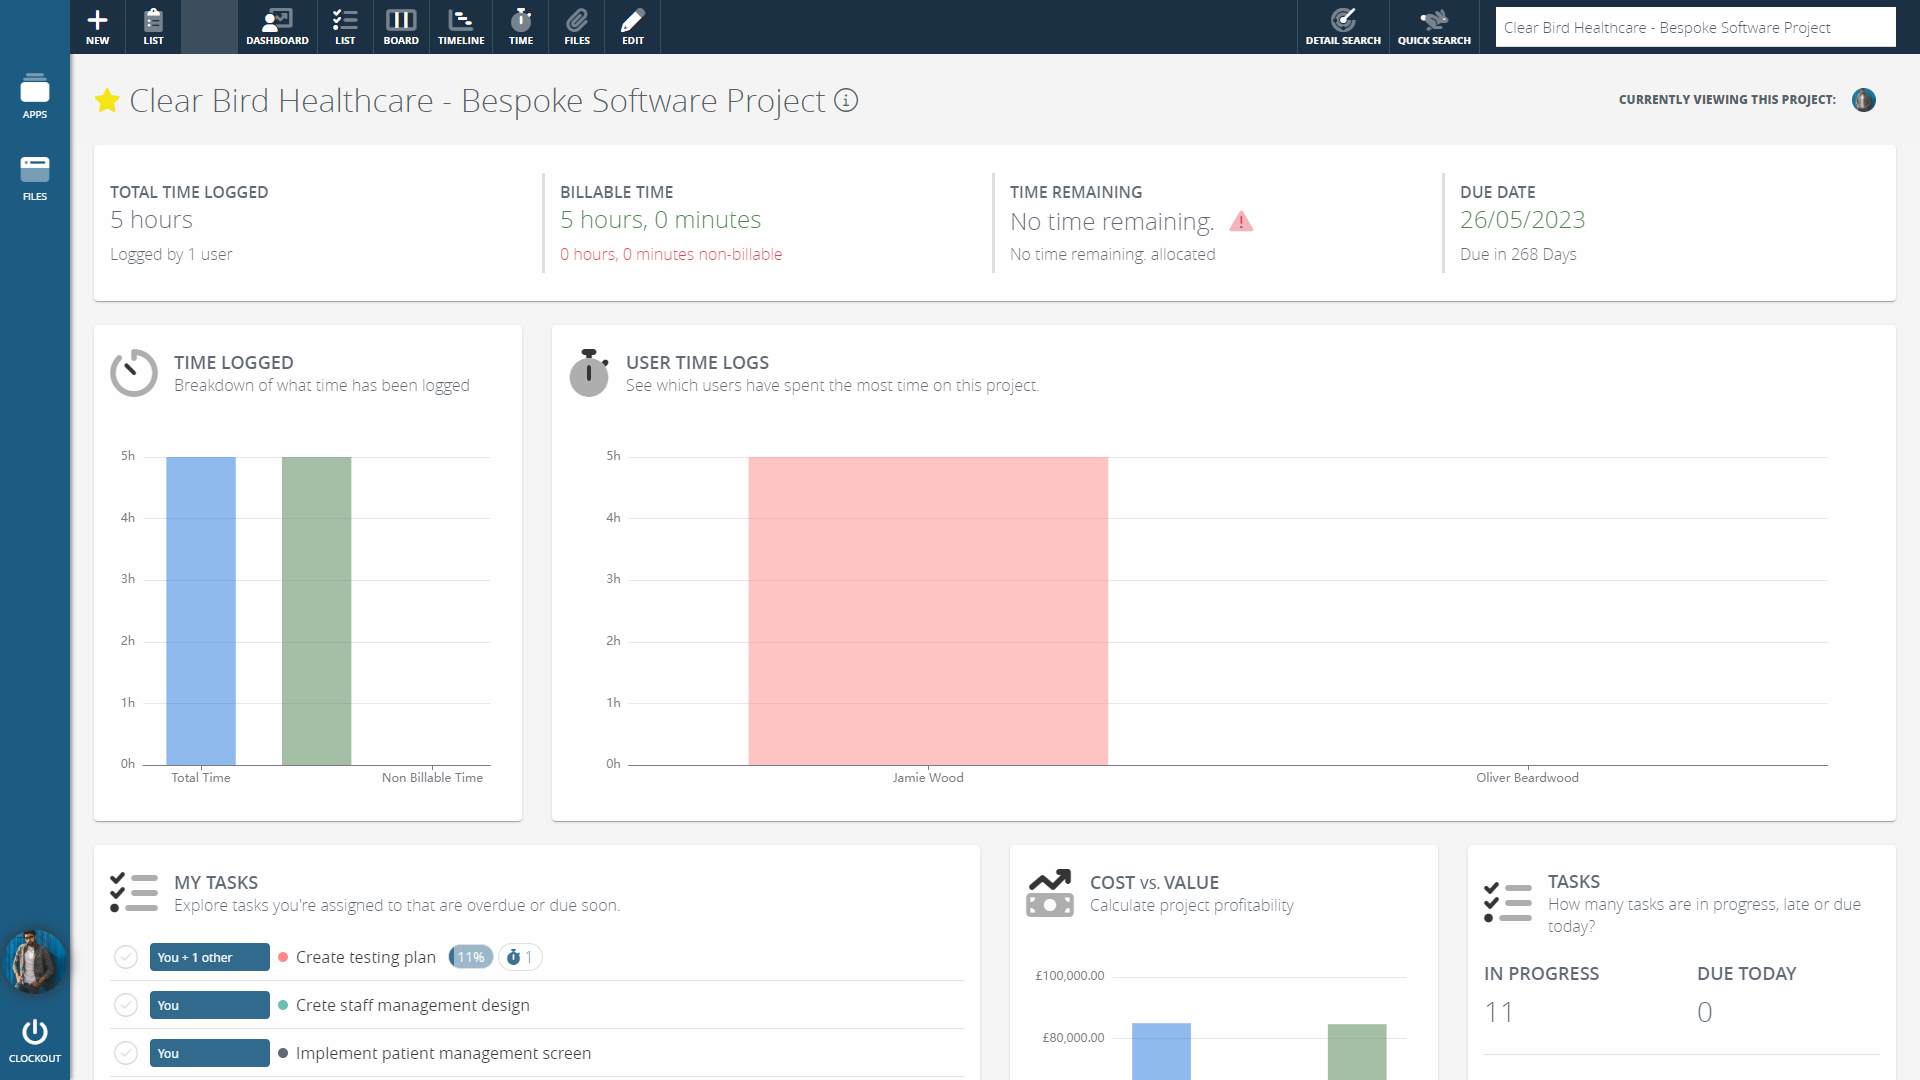 An image showing the updated project dashboard